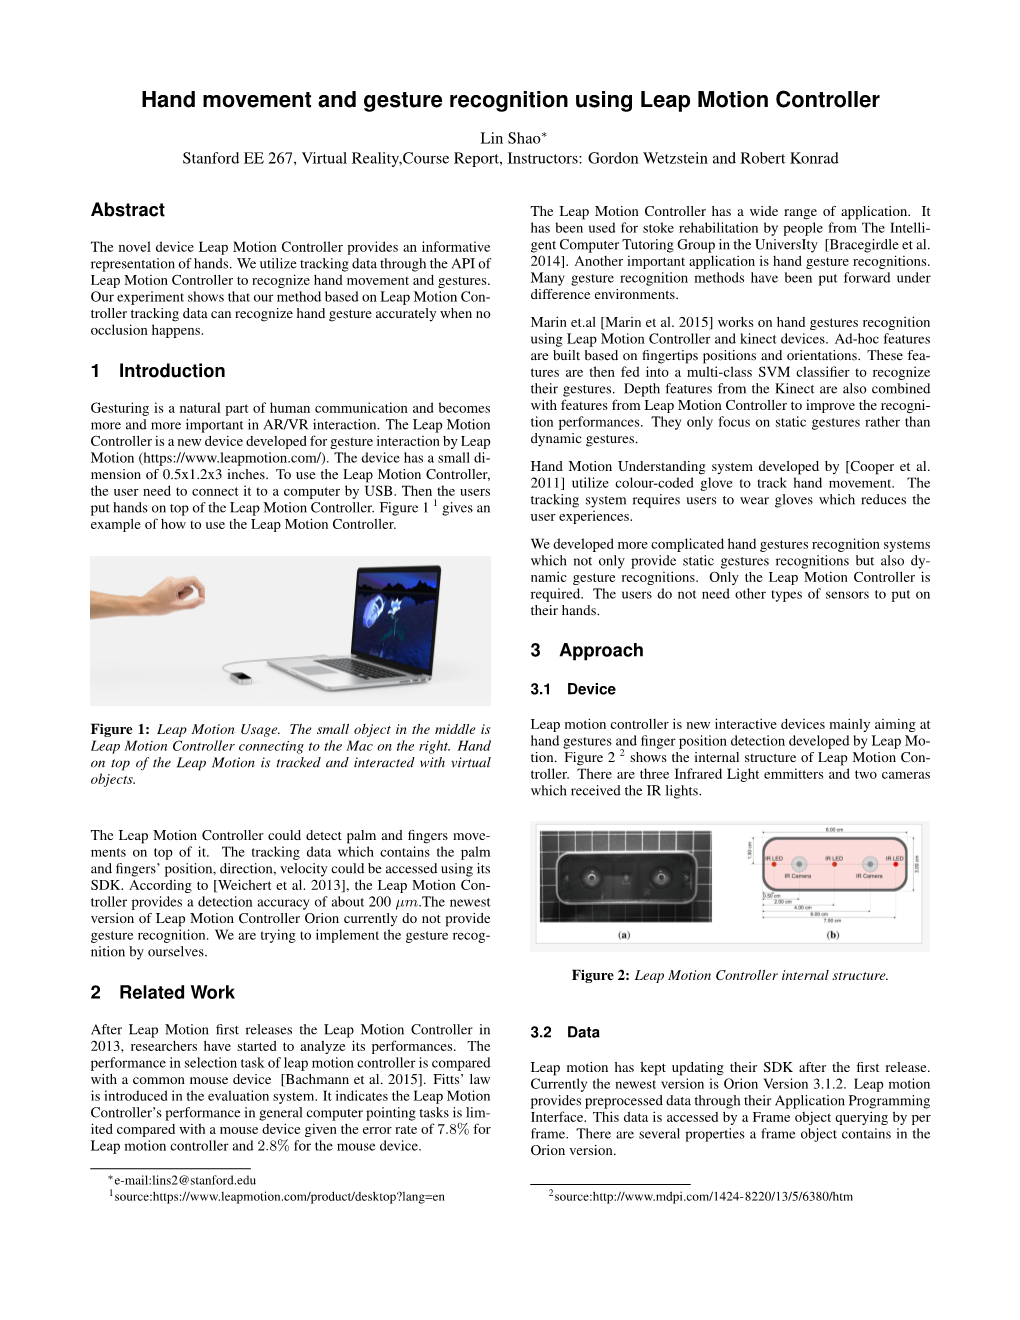 Hand Movement and Gesture Recognition Using Leap Motion Controller